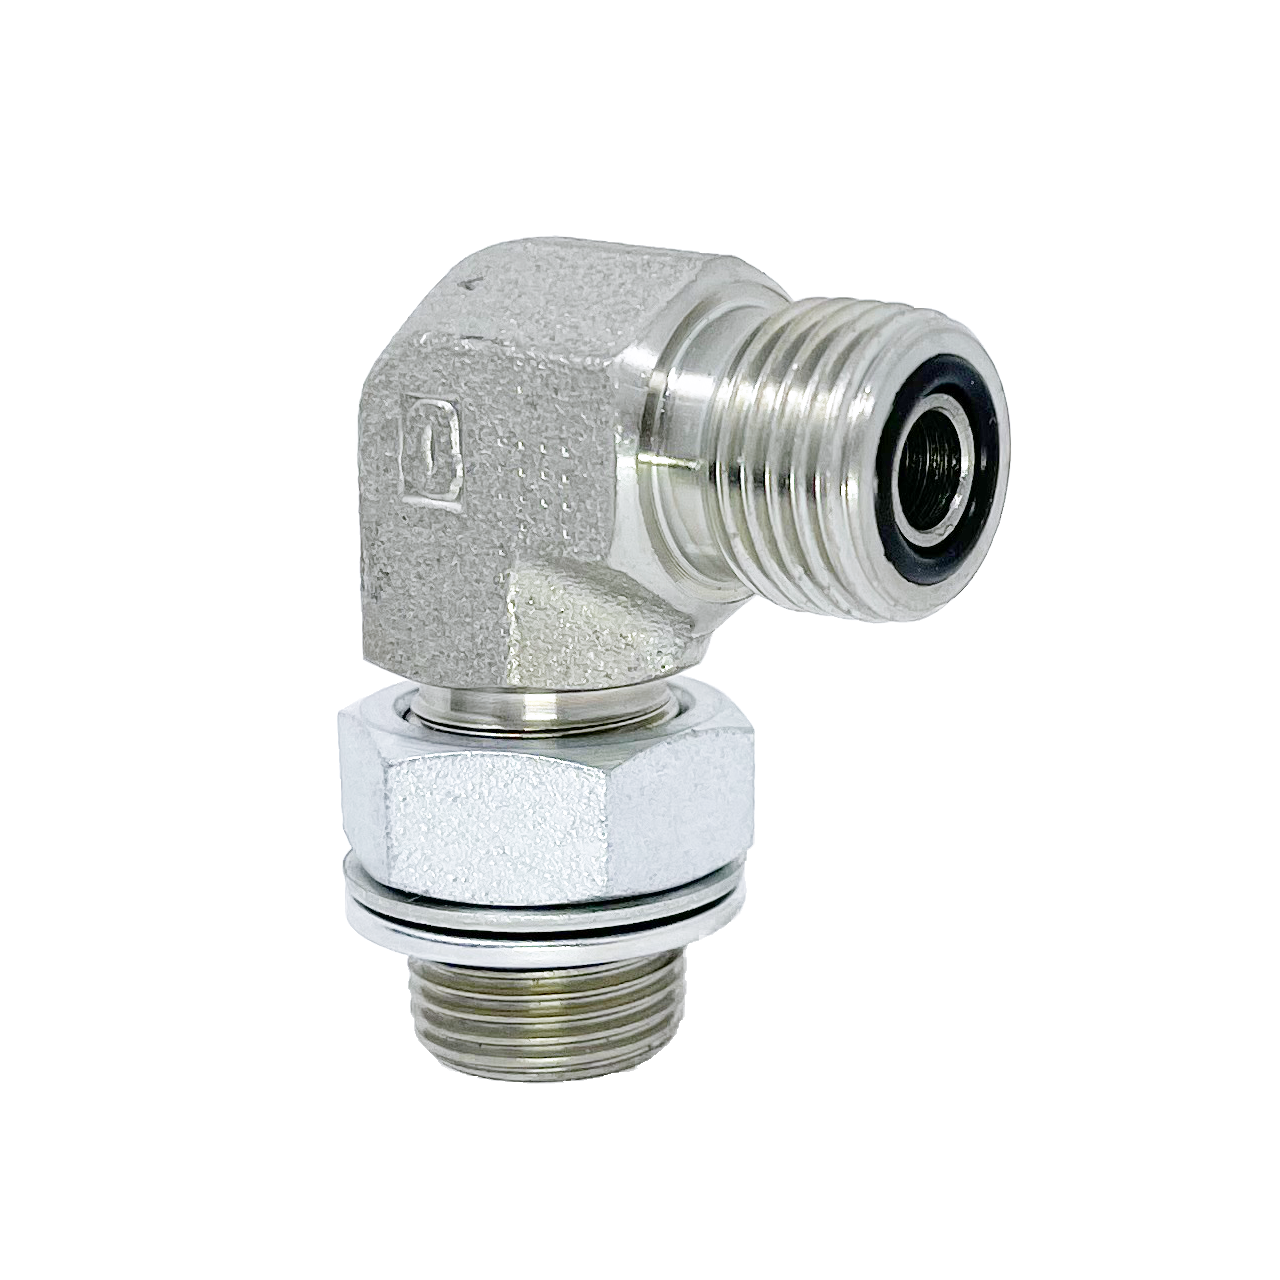 6059-12-08 : Adaptall 90-Degree  Adapter, Male 0.75 (3/4") ORFS x Male 0.5 (1/2") BSPP, Carbon Steel